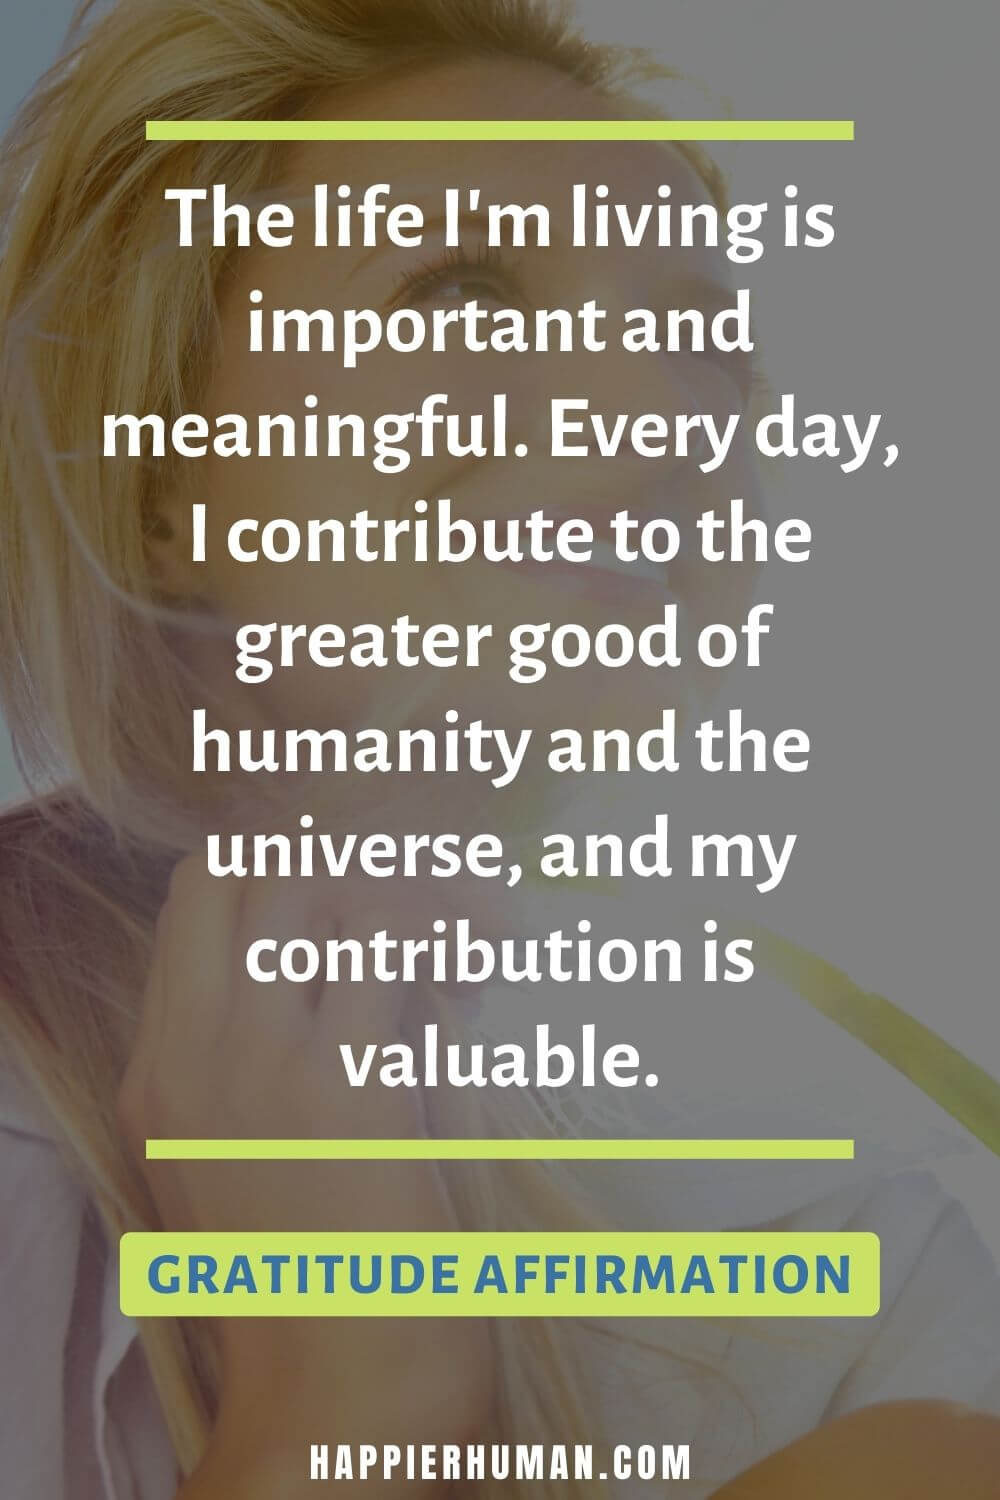 Gratitude Affirmations - The life I'm living is important and meaningful. Every day, I contribute to the greater good of humanity and the universe, and my contribution is valuable. | gratitude affirmations law of attraction | short gratitude affirmations | gratitude affirmations to the universe